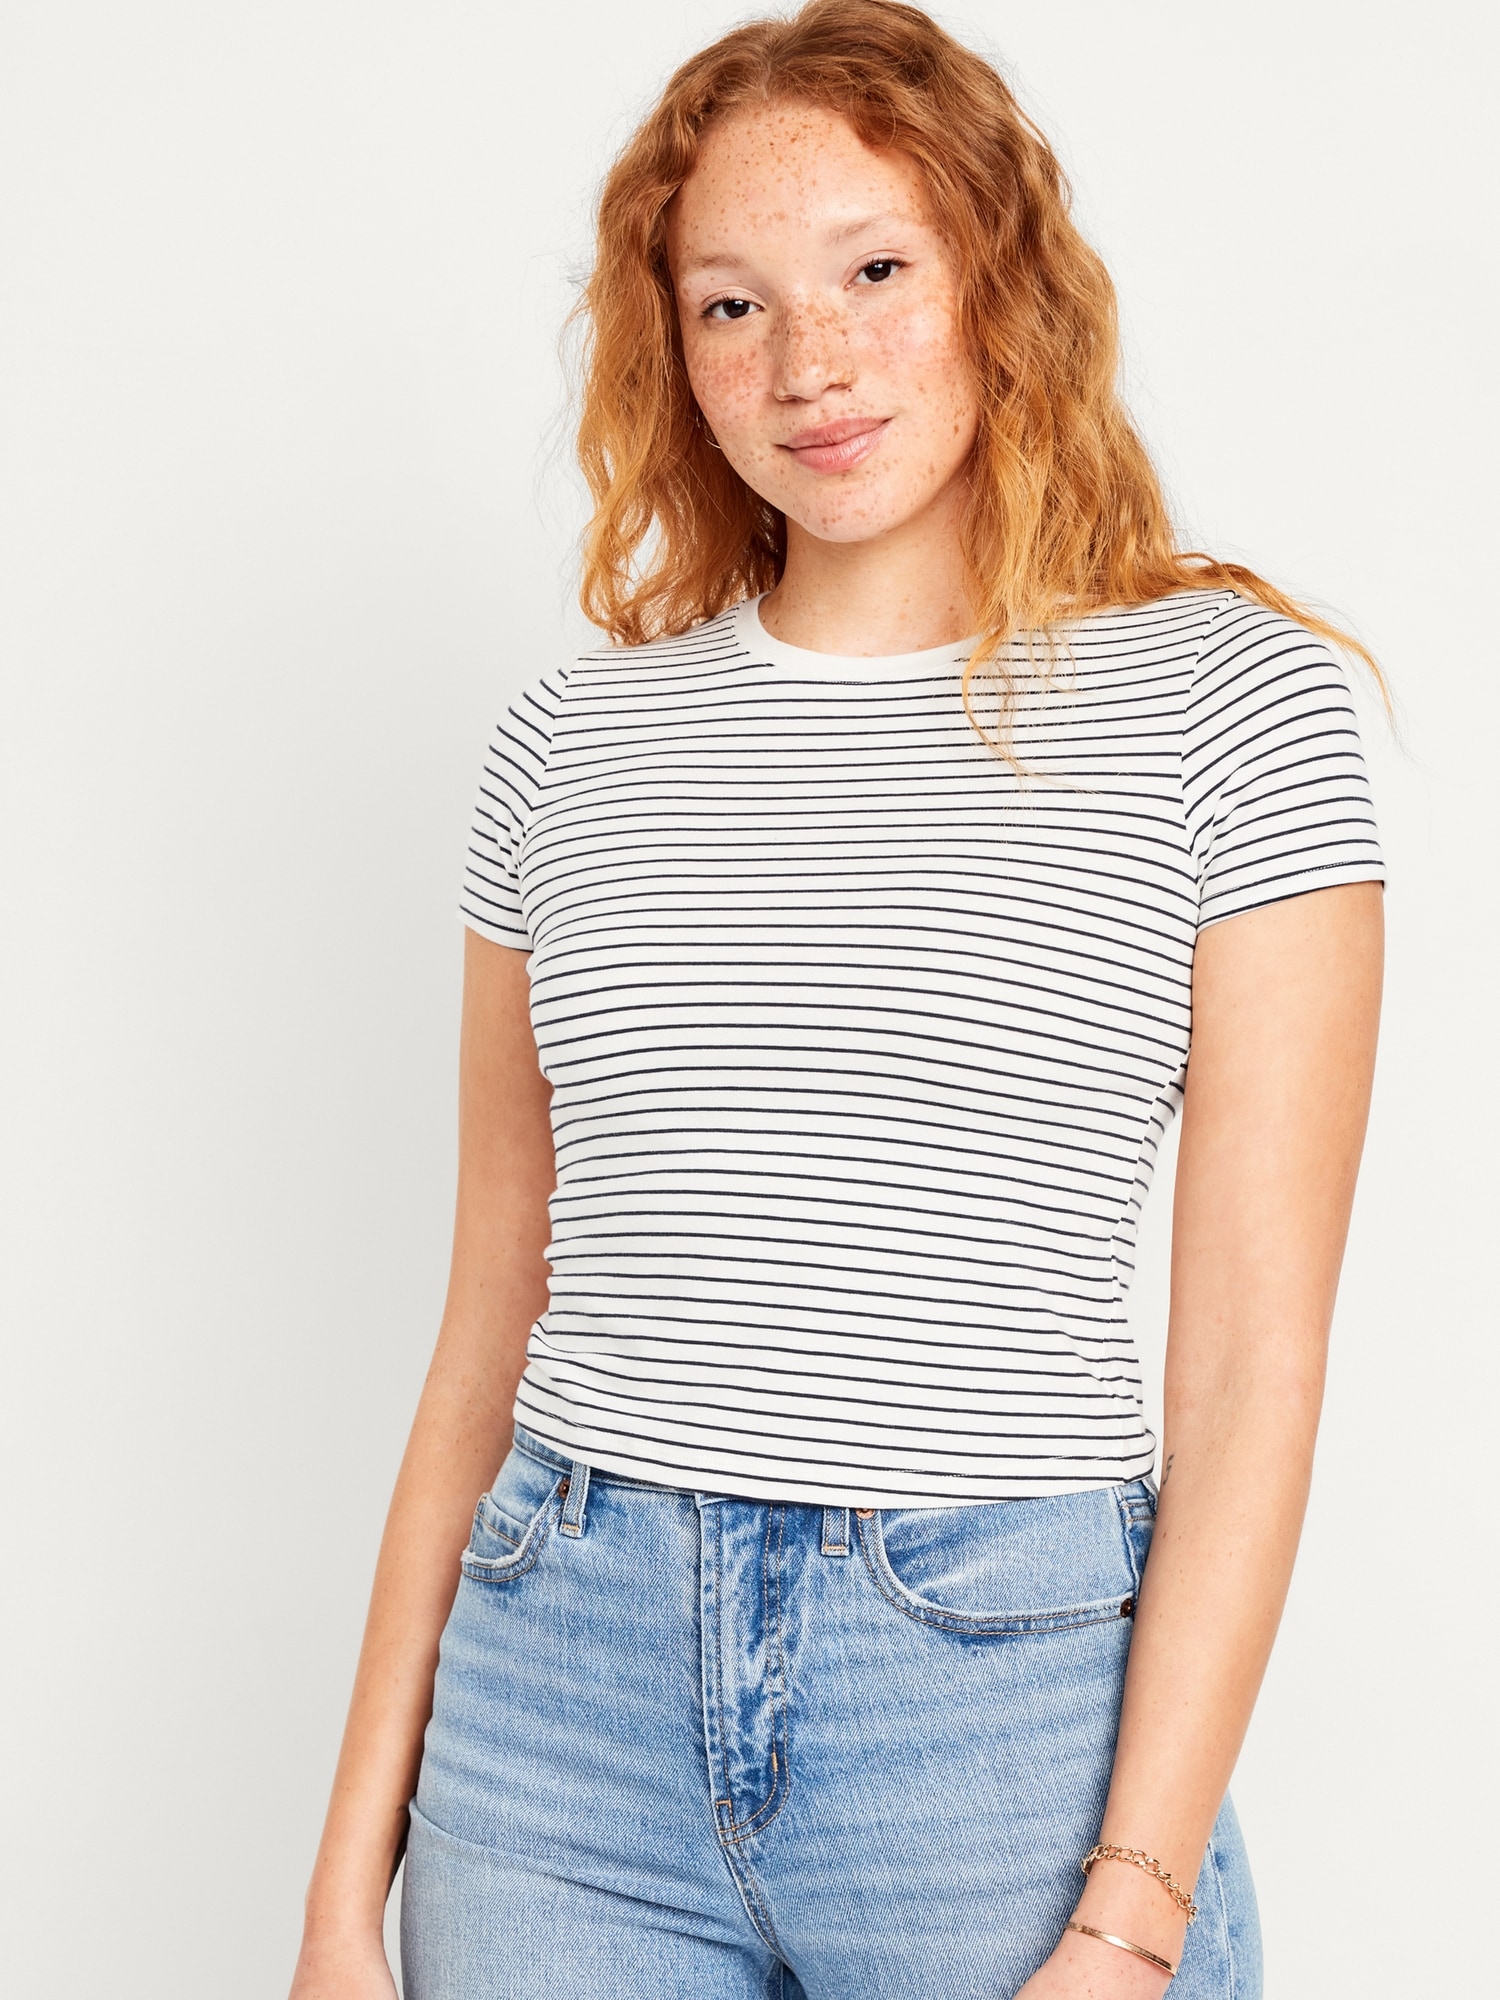 Cropped Bestee Old | Crew-Neck Women Navy for T-Shirt